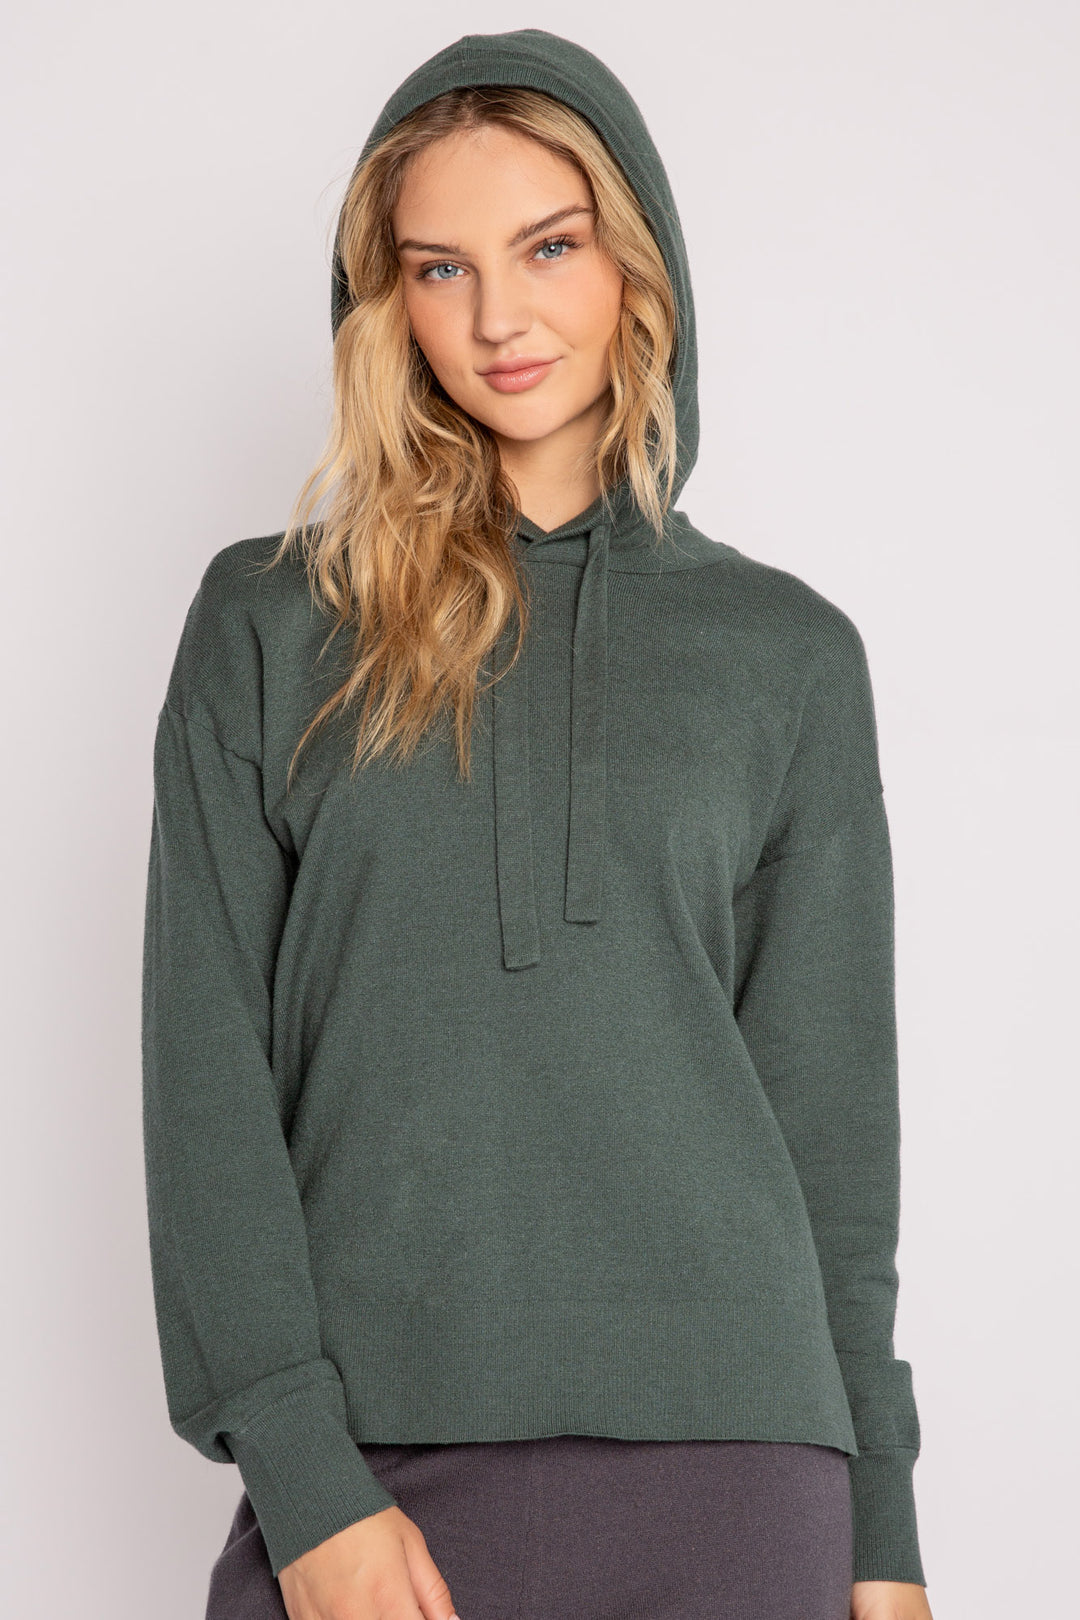 Sweater-knit pullover hoodie in dark green with stitched drawcords (7231885705316)